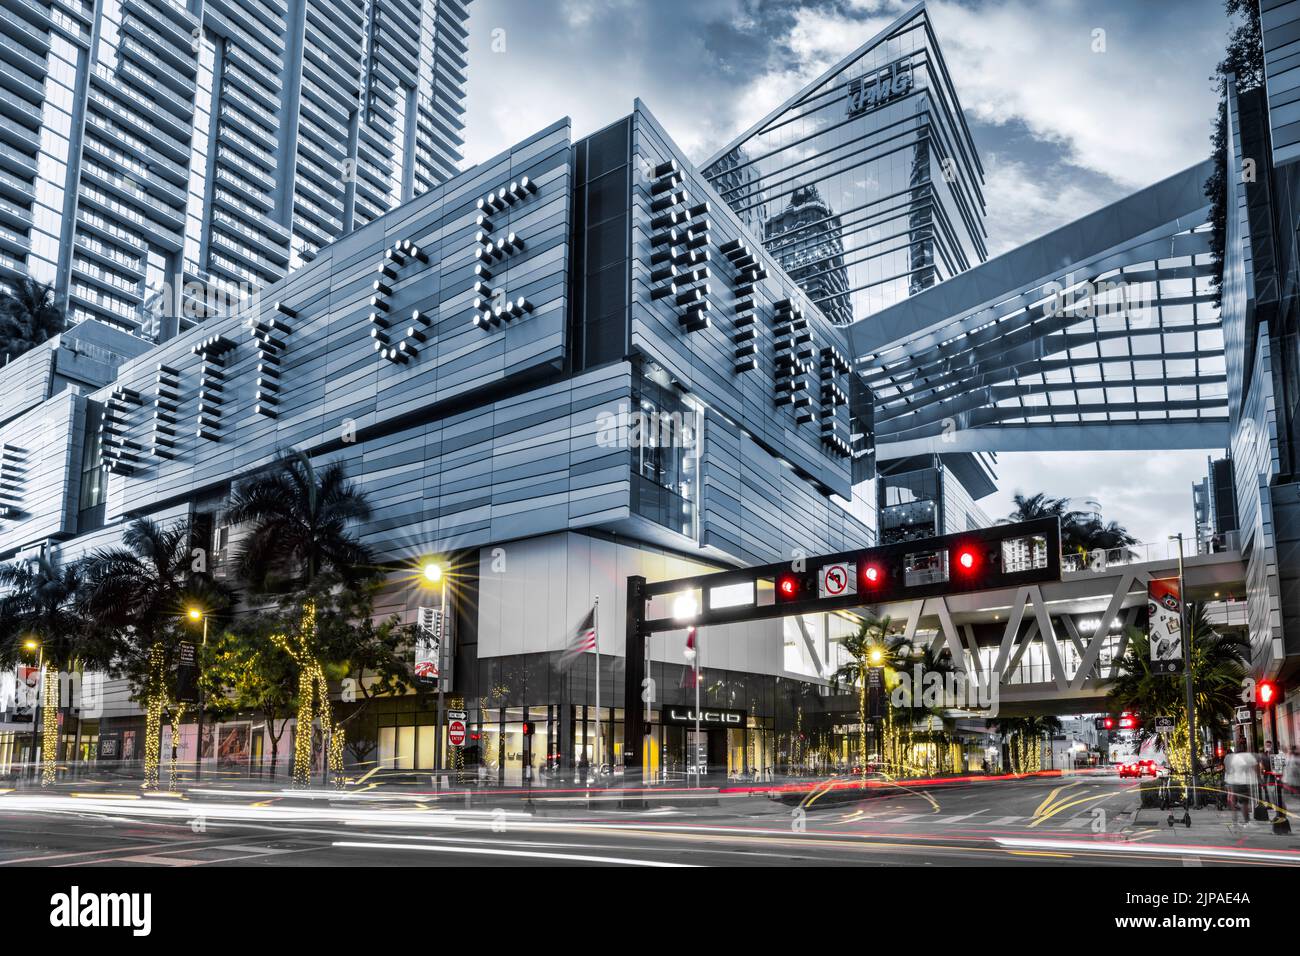 Apple store opens at Miami's Brickell City Centre - South Florida Business  Journal